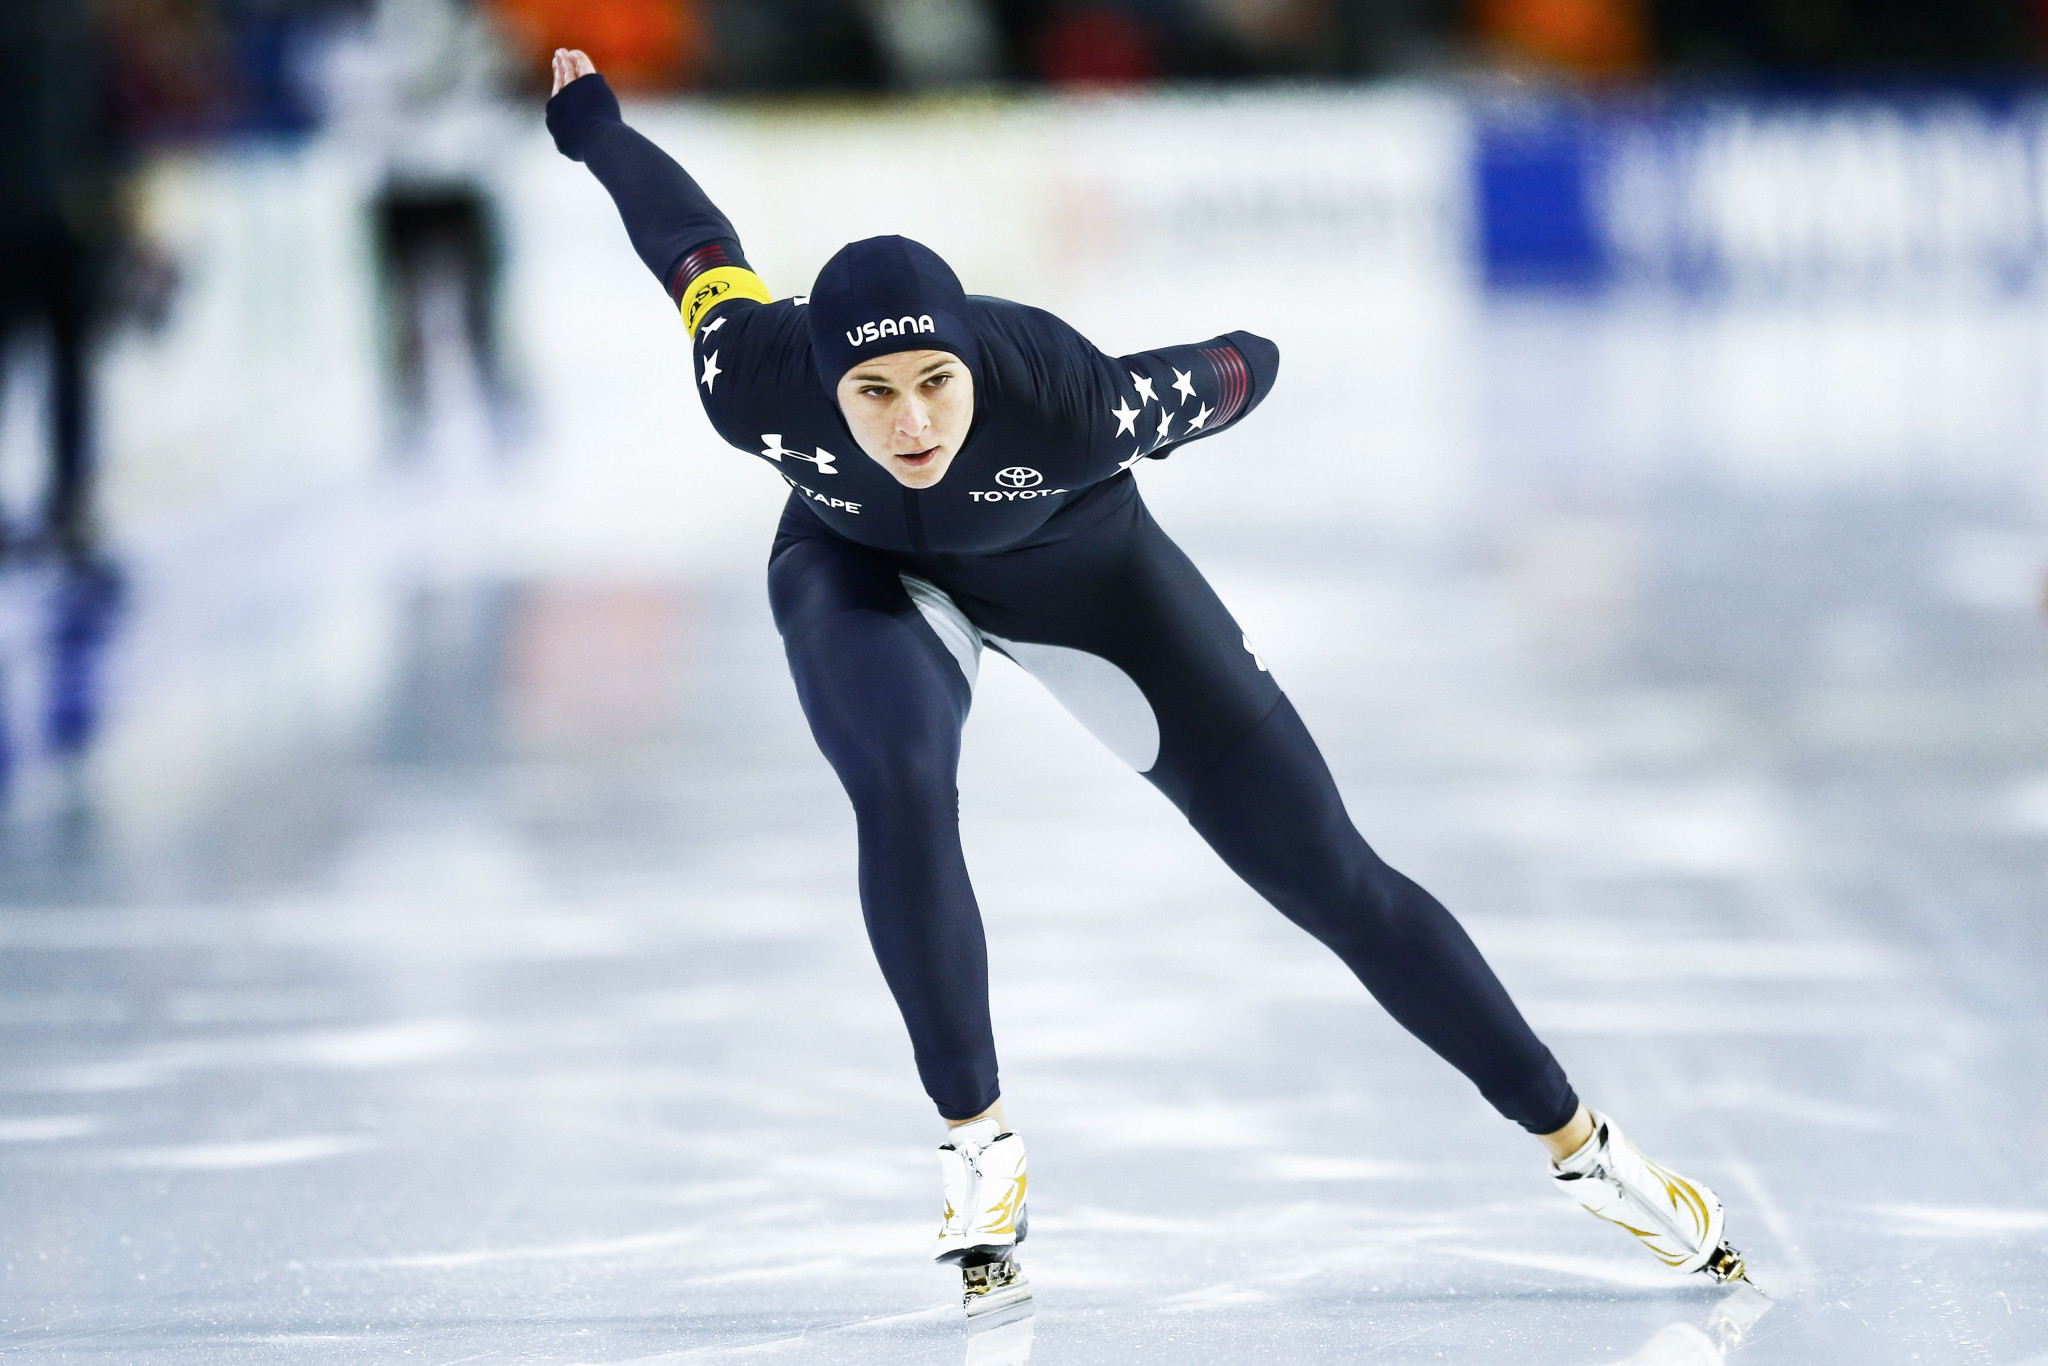 Bowe wins second gold of ISU Speed Skating World Cup in Hamar